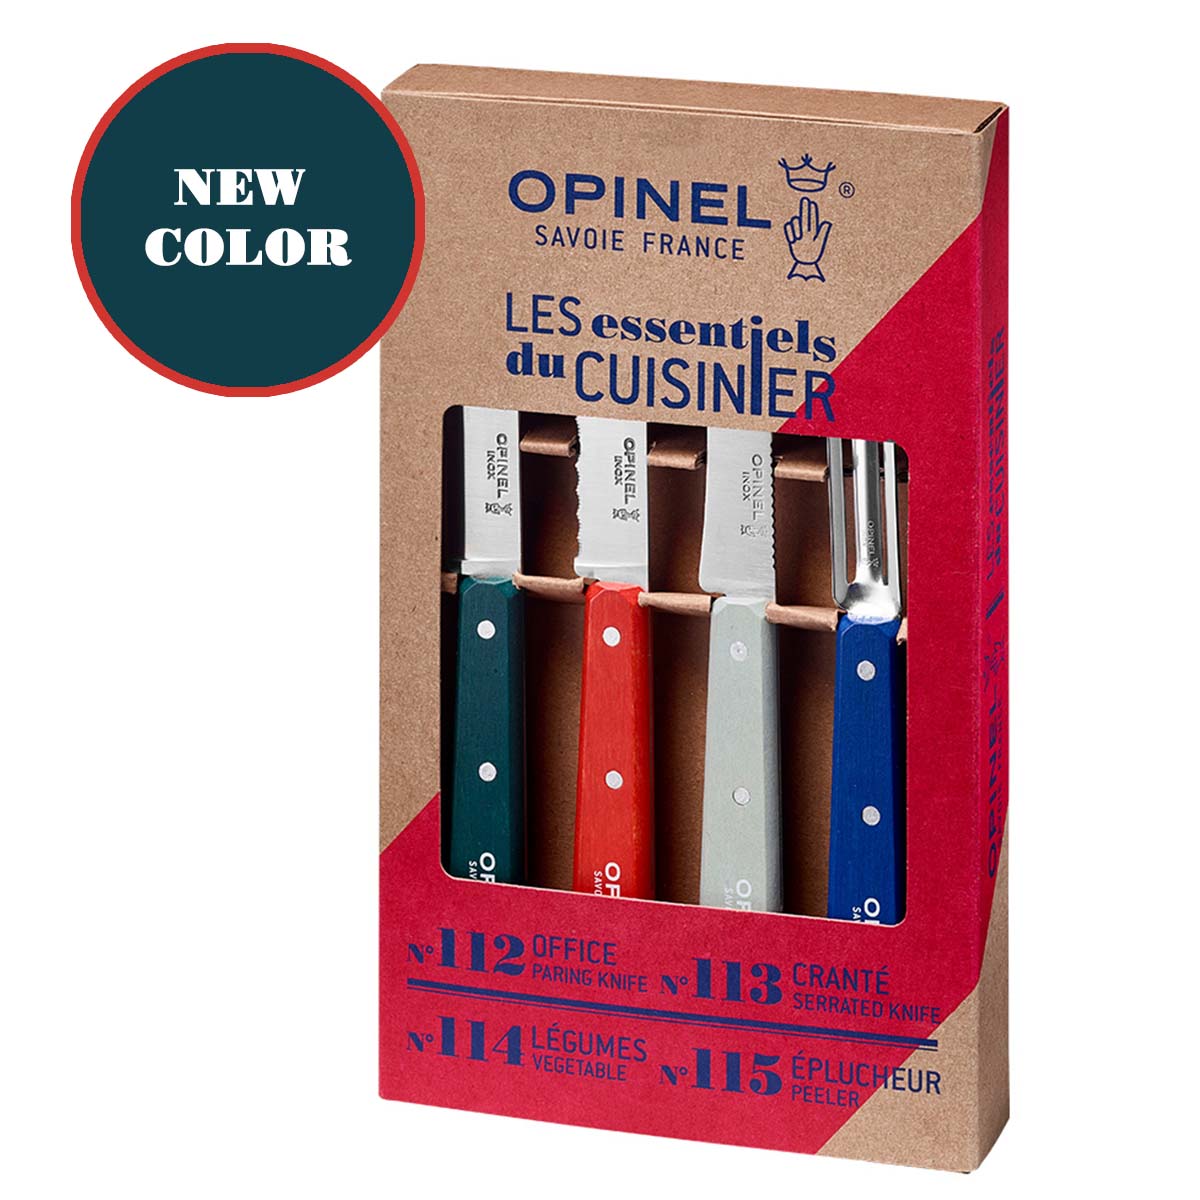 Essential Small Kitchen Knife Set